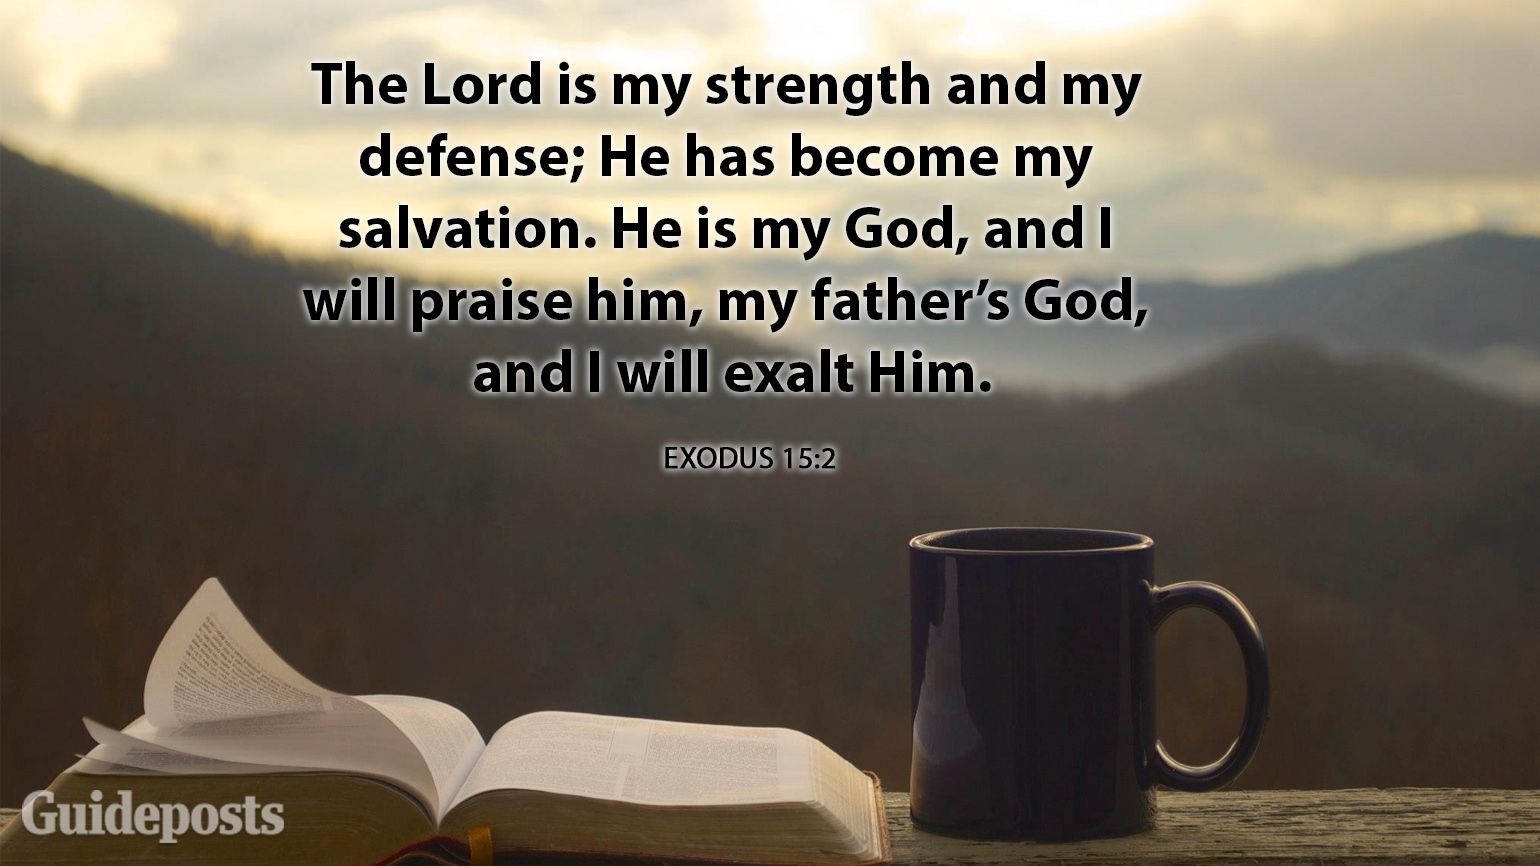 The Lord is my strength and my defense; He has become my salvation. He is my God, and I will praise him, my father’s God, and I will exalt Him